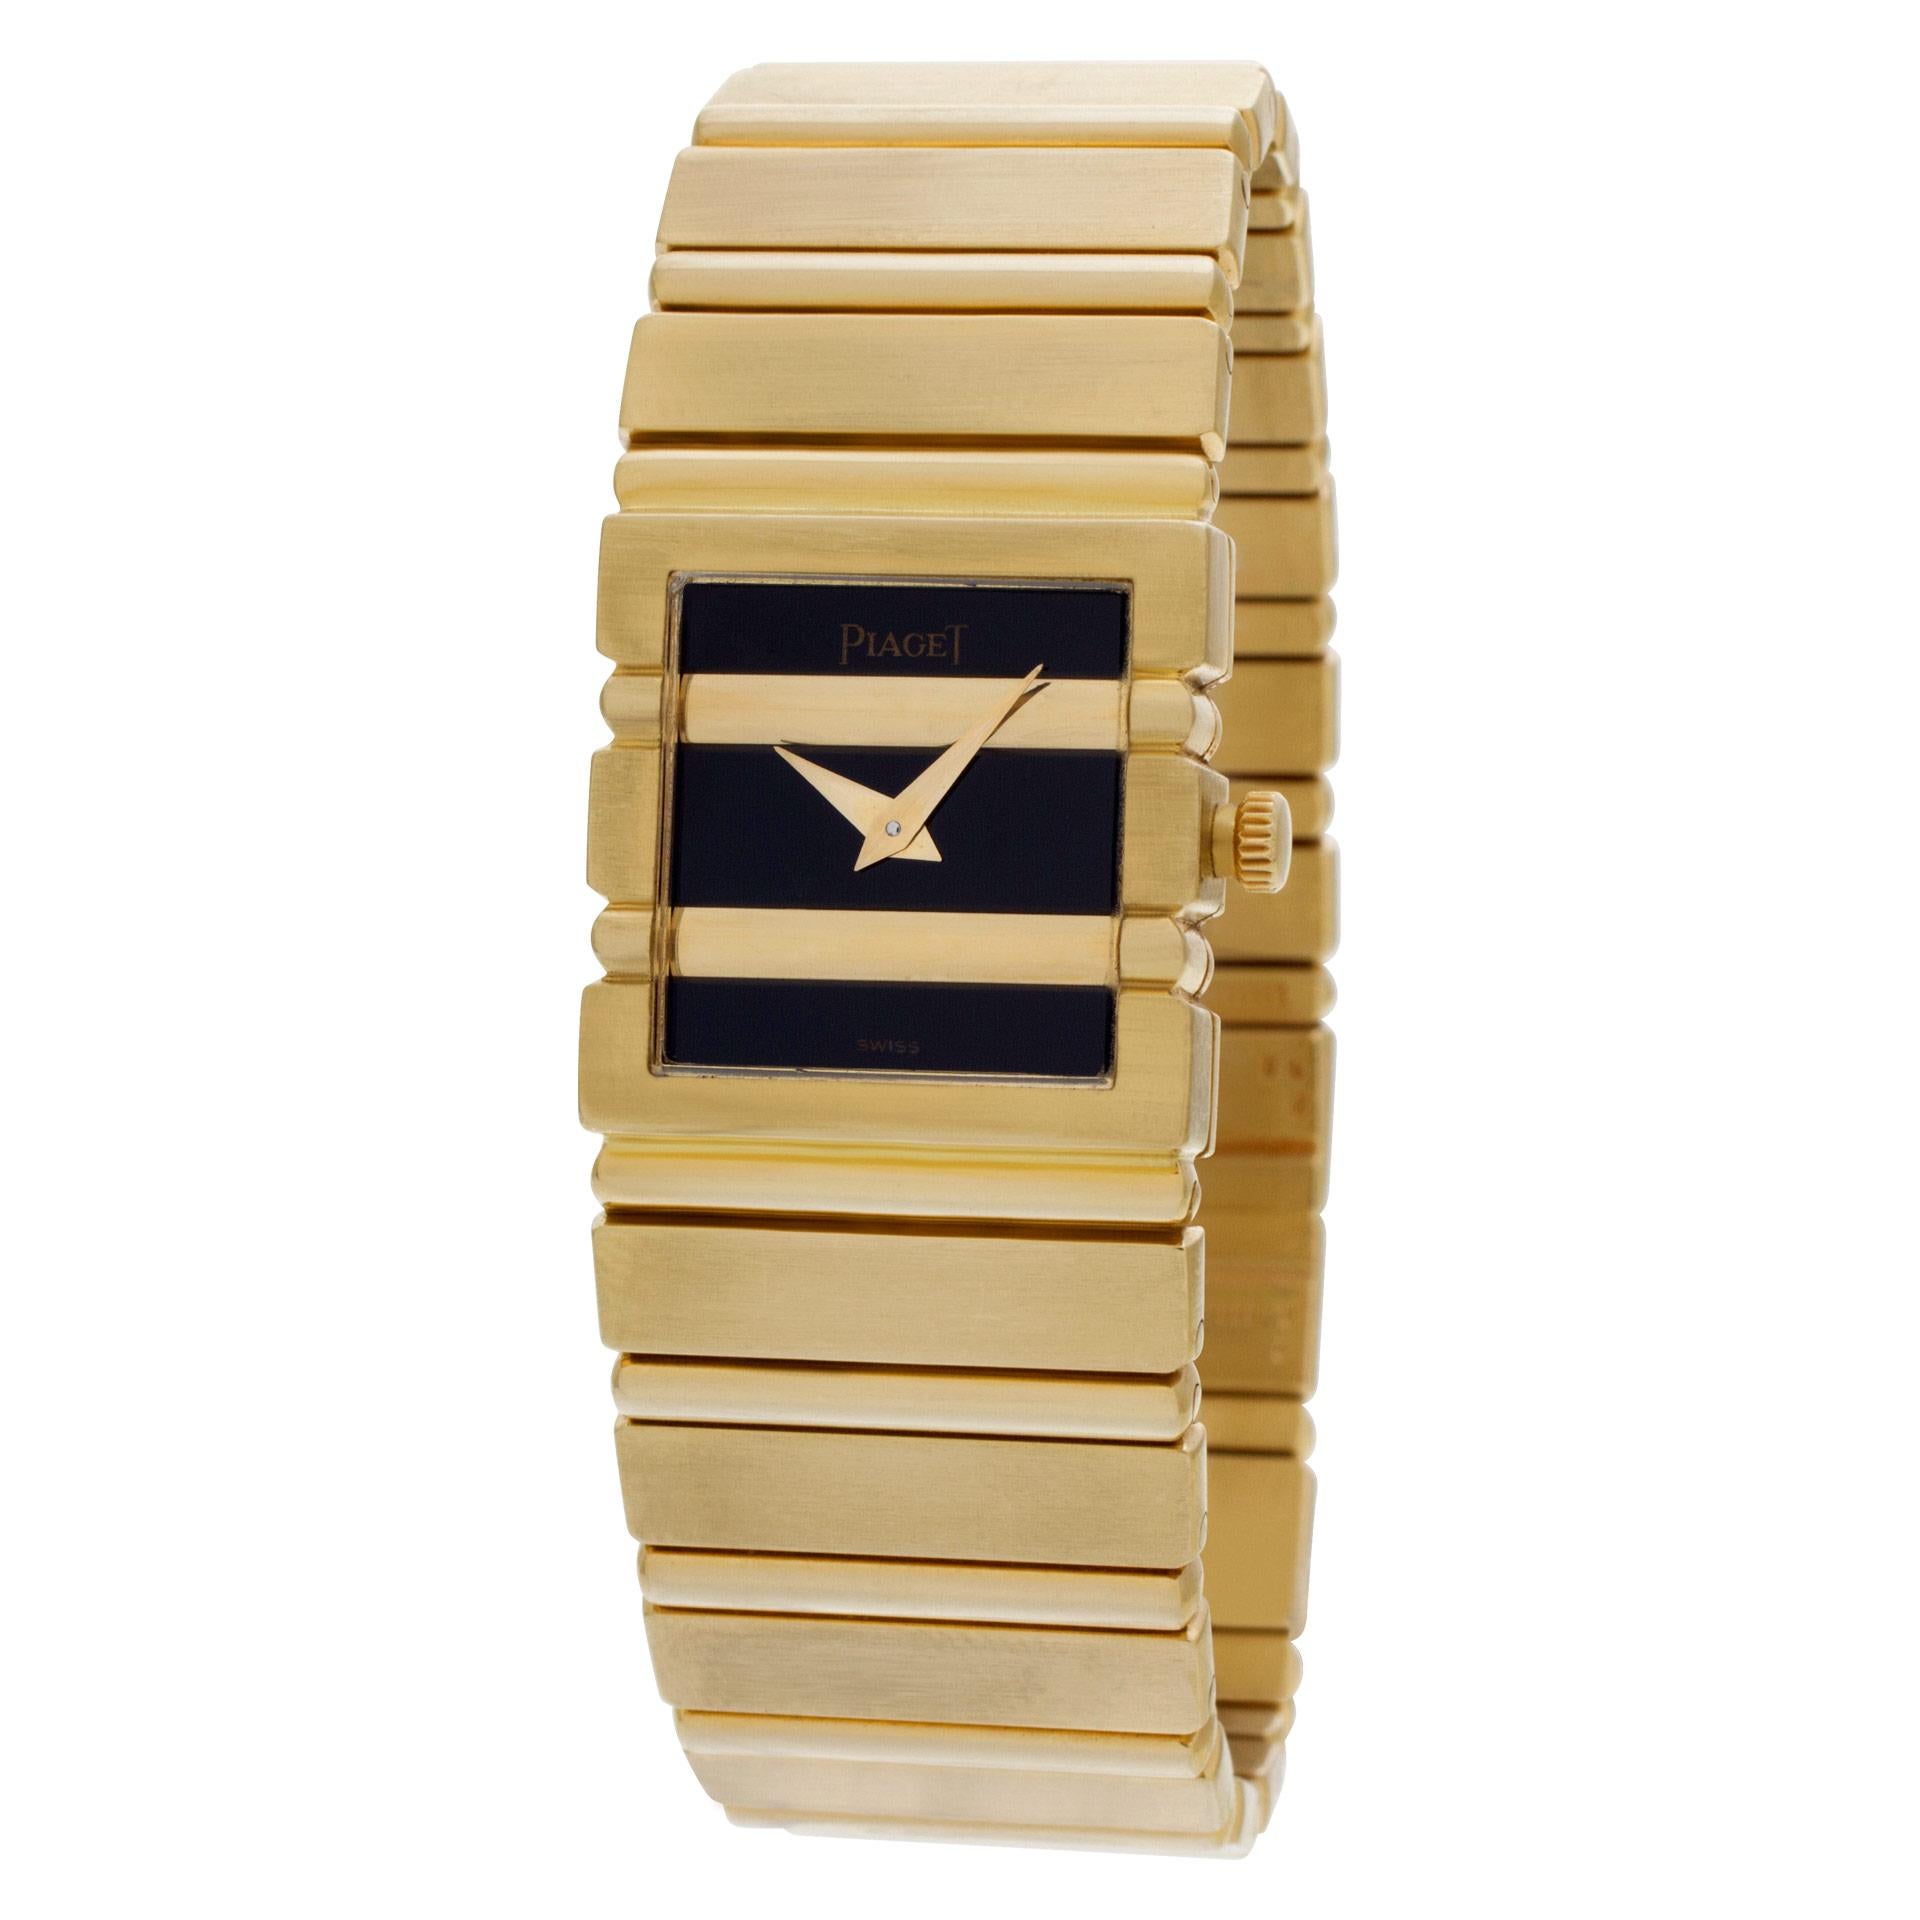 Ladies Piaget Polo in 18k yellow gold with black onyx inlay dial. Quartz. Ref 81310701. 20mm case size. Fine Pre-owned Piaget Watch. Certified preowned Piaget Polo 81310701 watch is made out of yellow gold on a 18k bracelet with a 18k Clasp buckle.